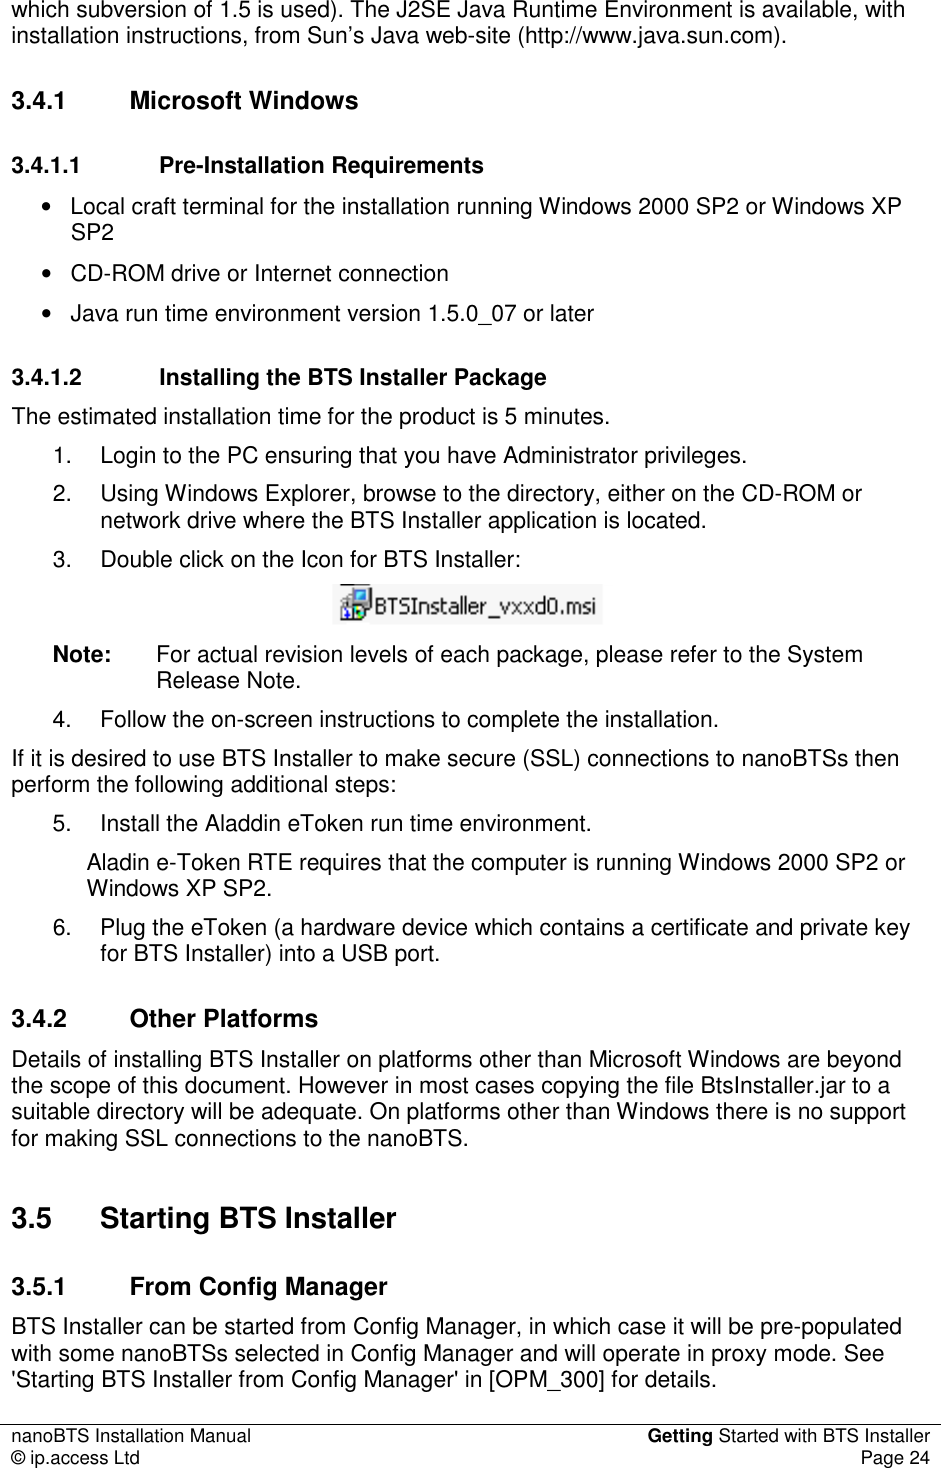 nanoBTS Installation Manual  Getting Started with BTS Installer © ip.access Ltd  Page 24  which subversion of 1.5 is used). The J2SE Java Runtime Environment is available, with installation instructions, from Sun’s Java web-site (http://www.java.sun.com). 3.4.1  Microsoft Windows 3.4.1.1  Pre-Installation Requirements •  Local craft terminal for the installation running Windows 2000 SP2 or Windows XP SP2 •  CD-ROM drive or Internet connection •  Java run time environment version 1.5.0_07 or later 3.4.1.2  Installing the BTS Installer Package The estimated installation time for the product is 5 minutes. 1.  Login to the PC ensuring that you have Administrator privileges. 2.  Using Windows Explorer, browse to the directory, either on the CD-ROM or network drive where the BTS Installer application is located. 3.  Double click on the Icon for BTS Installer:  Note:  For actual revision levels of each package, please refer to the System Release Note. 4.  Follow the on-screen instructions to complete the installation. If it is desired to use BTS Installer to make secure (SSL) connections to nanoBTSs then perform the following additional steps: 5.  Install the Aladdin eToken run time environment. Aladin e-Token RTE requires that the computer is running Windows 2000 SP2 or Windows XP SP2. 6.  Plug the eToken (a hardware device which contains a certificate and private key for BTS Installer) into a USB port. 3.4.2  Other Platforms Details of installing BTS Installer on platforms other than Microsoft Windows are beyond the scope of this document. However in most cases copying the file BtsInstaller.jar to a suitable directory will be adequate. On platforms other than Windows there is no support for making SSL connections to the nanoBTS. 3.5  Starting BTS Installer 3.5.1  From Config Manager BTS Installer can be started from Config Manager, in which case it will be pre-populated with some nanoBTSs selected in Config Manager and will operate in proxy mode. See &apos;Starting BTS Installer from Config Manager&apos; in [OPM_300] for details. 